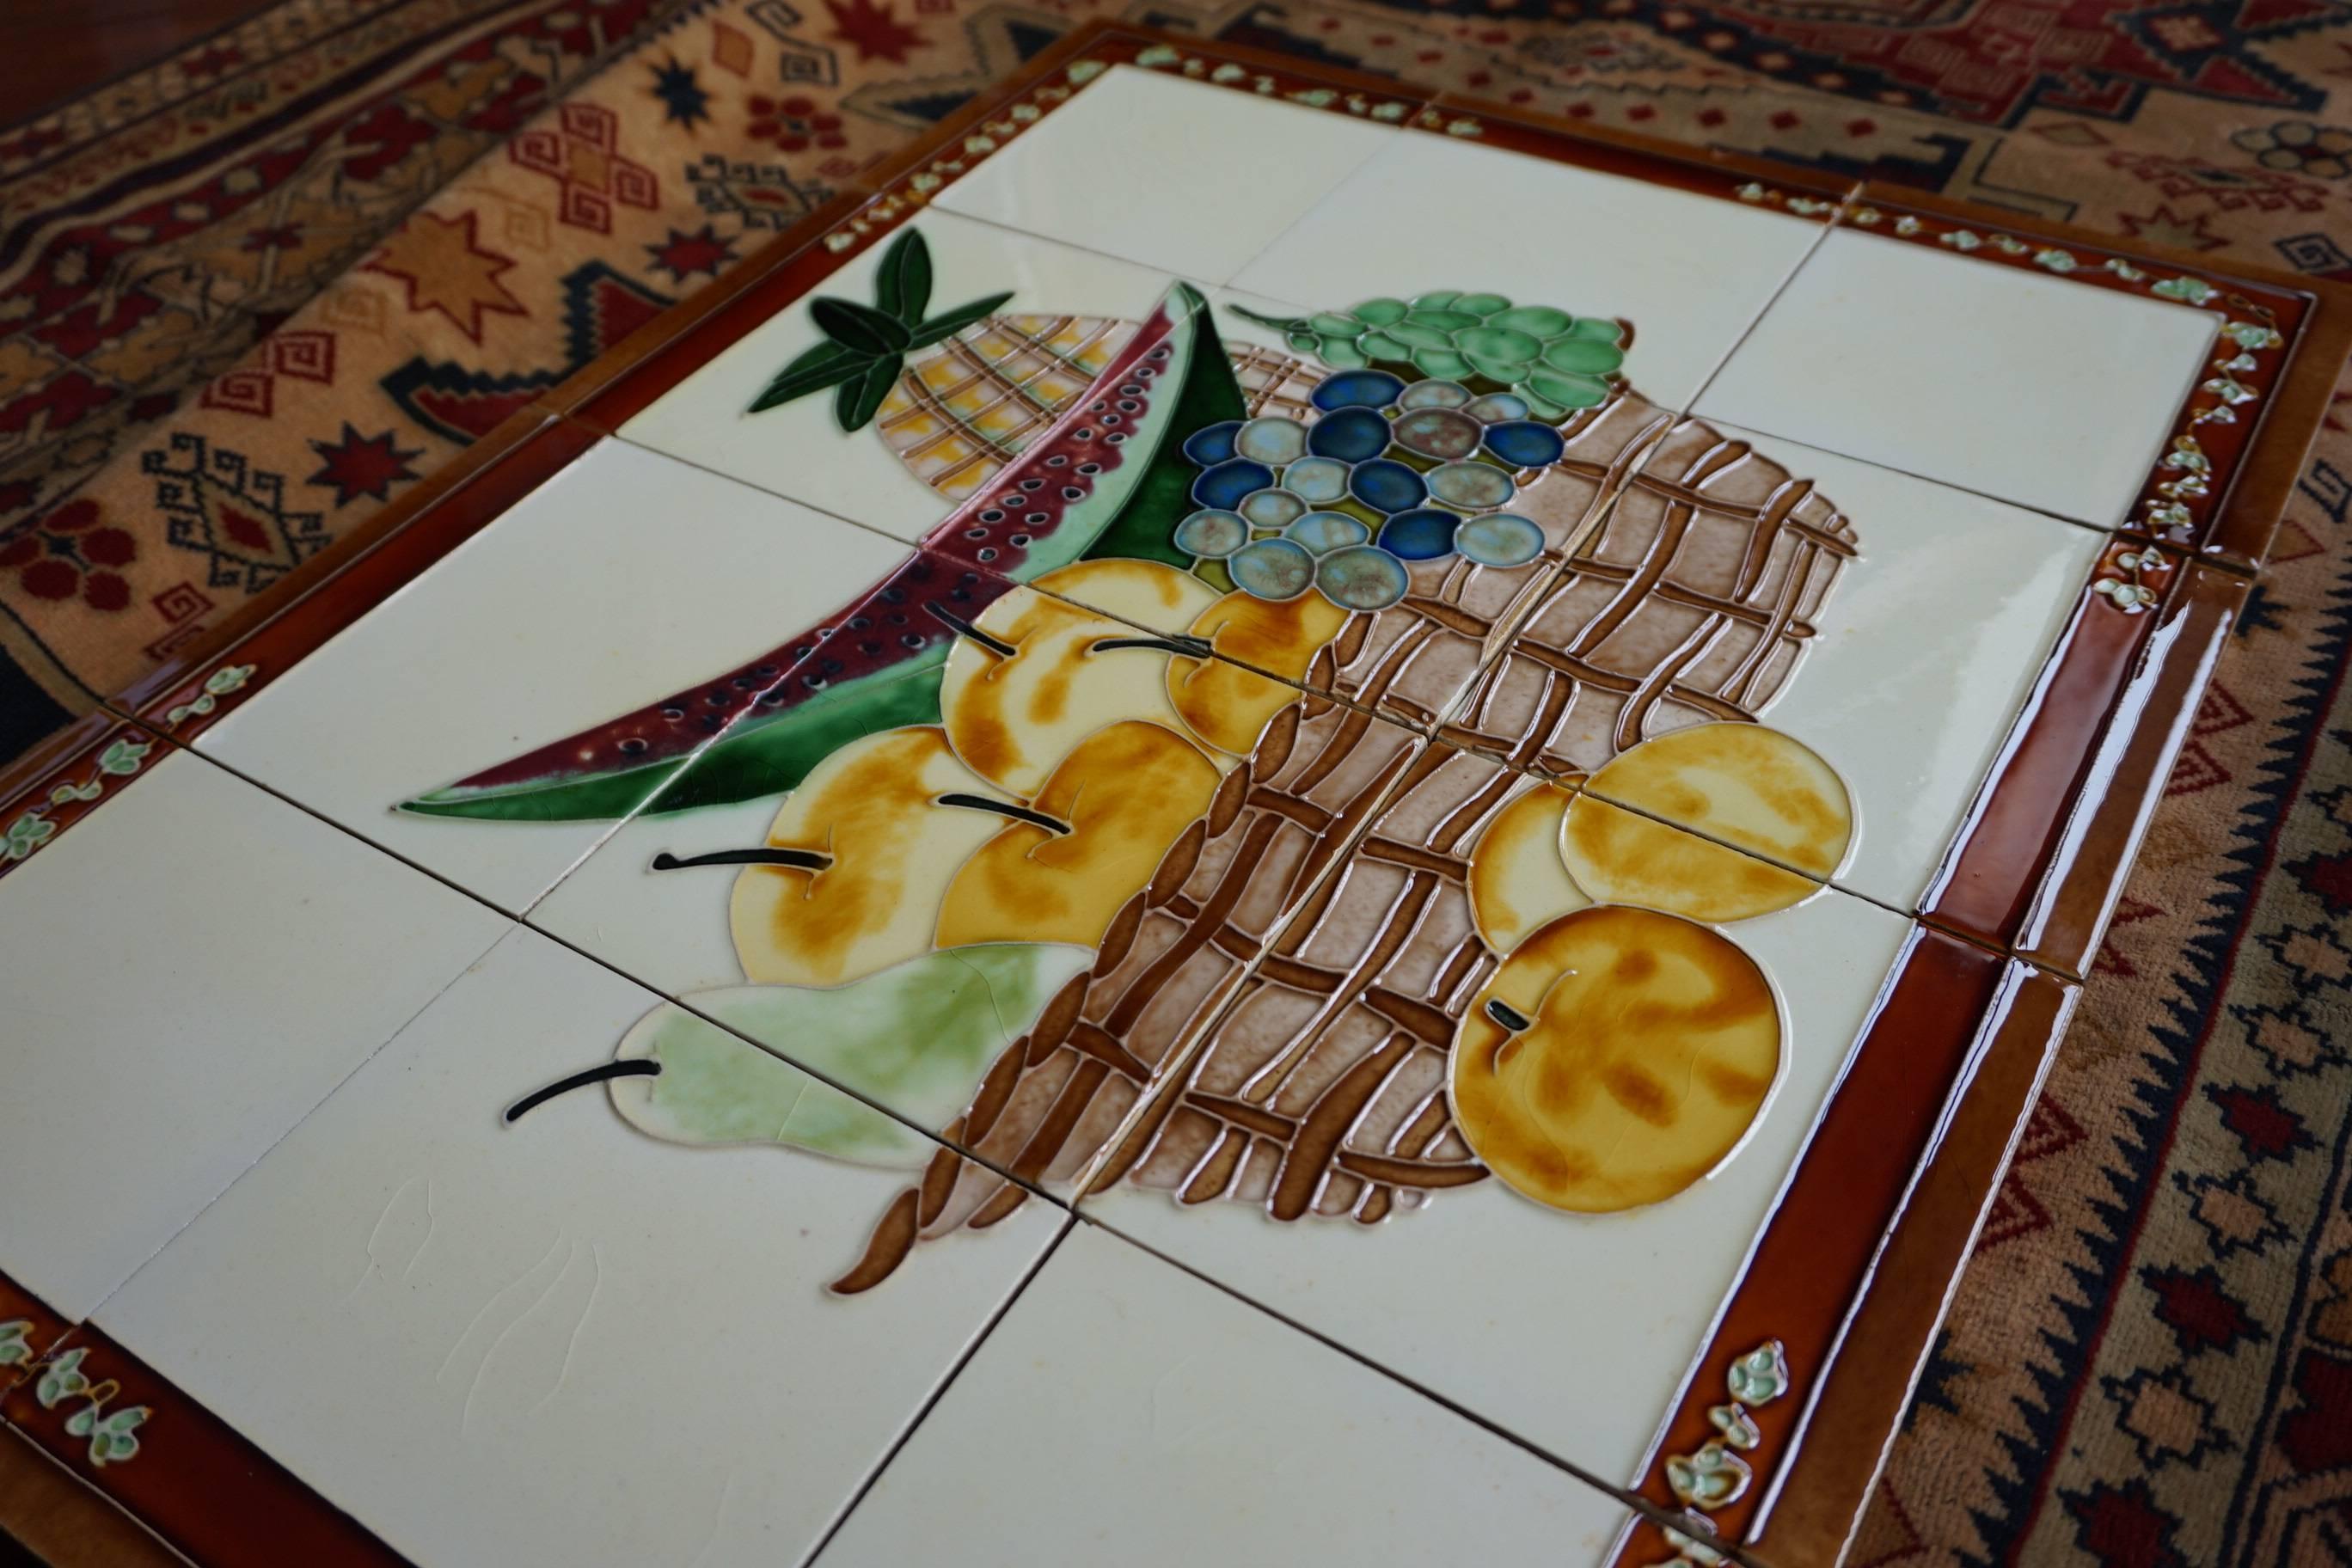 Colorful, bright and highly decorative tableau of 12 tiles.

This wonderful tableau of tiles from the midcentury period is in near mint condition. This wonderful 'tile painting' of a fruit basket is done in the most vibrant of fruity colors and the